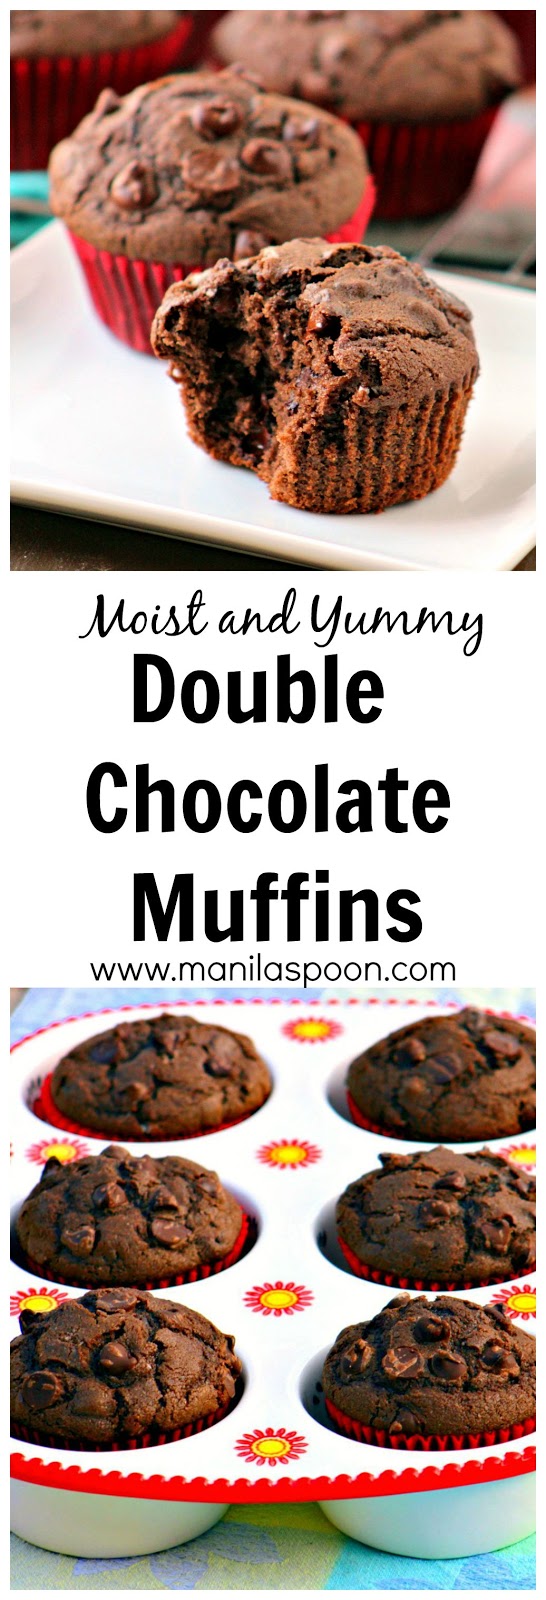 Double the chocolate equals pure chocolate bliss - Double Chocolate Chip Muffins! Perfect for breakfast or as a snack! #doublechocolate #chocolate #muffins #breakfast #snack